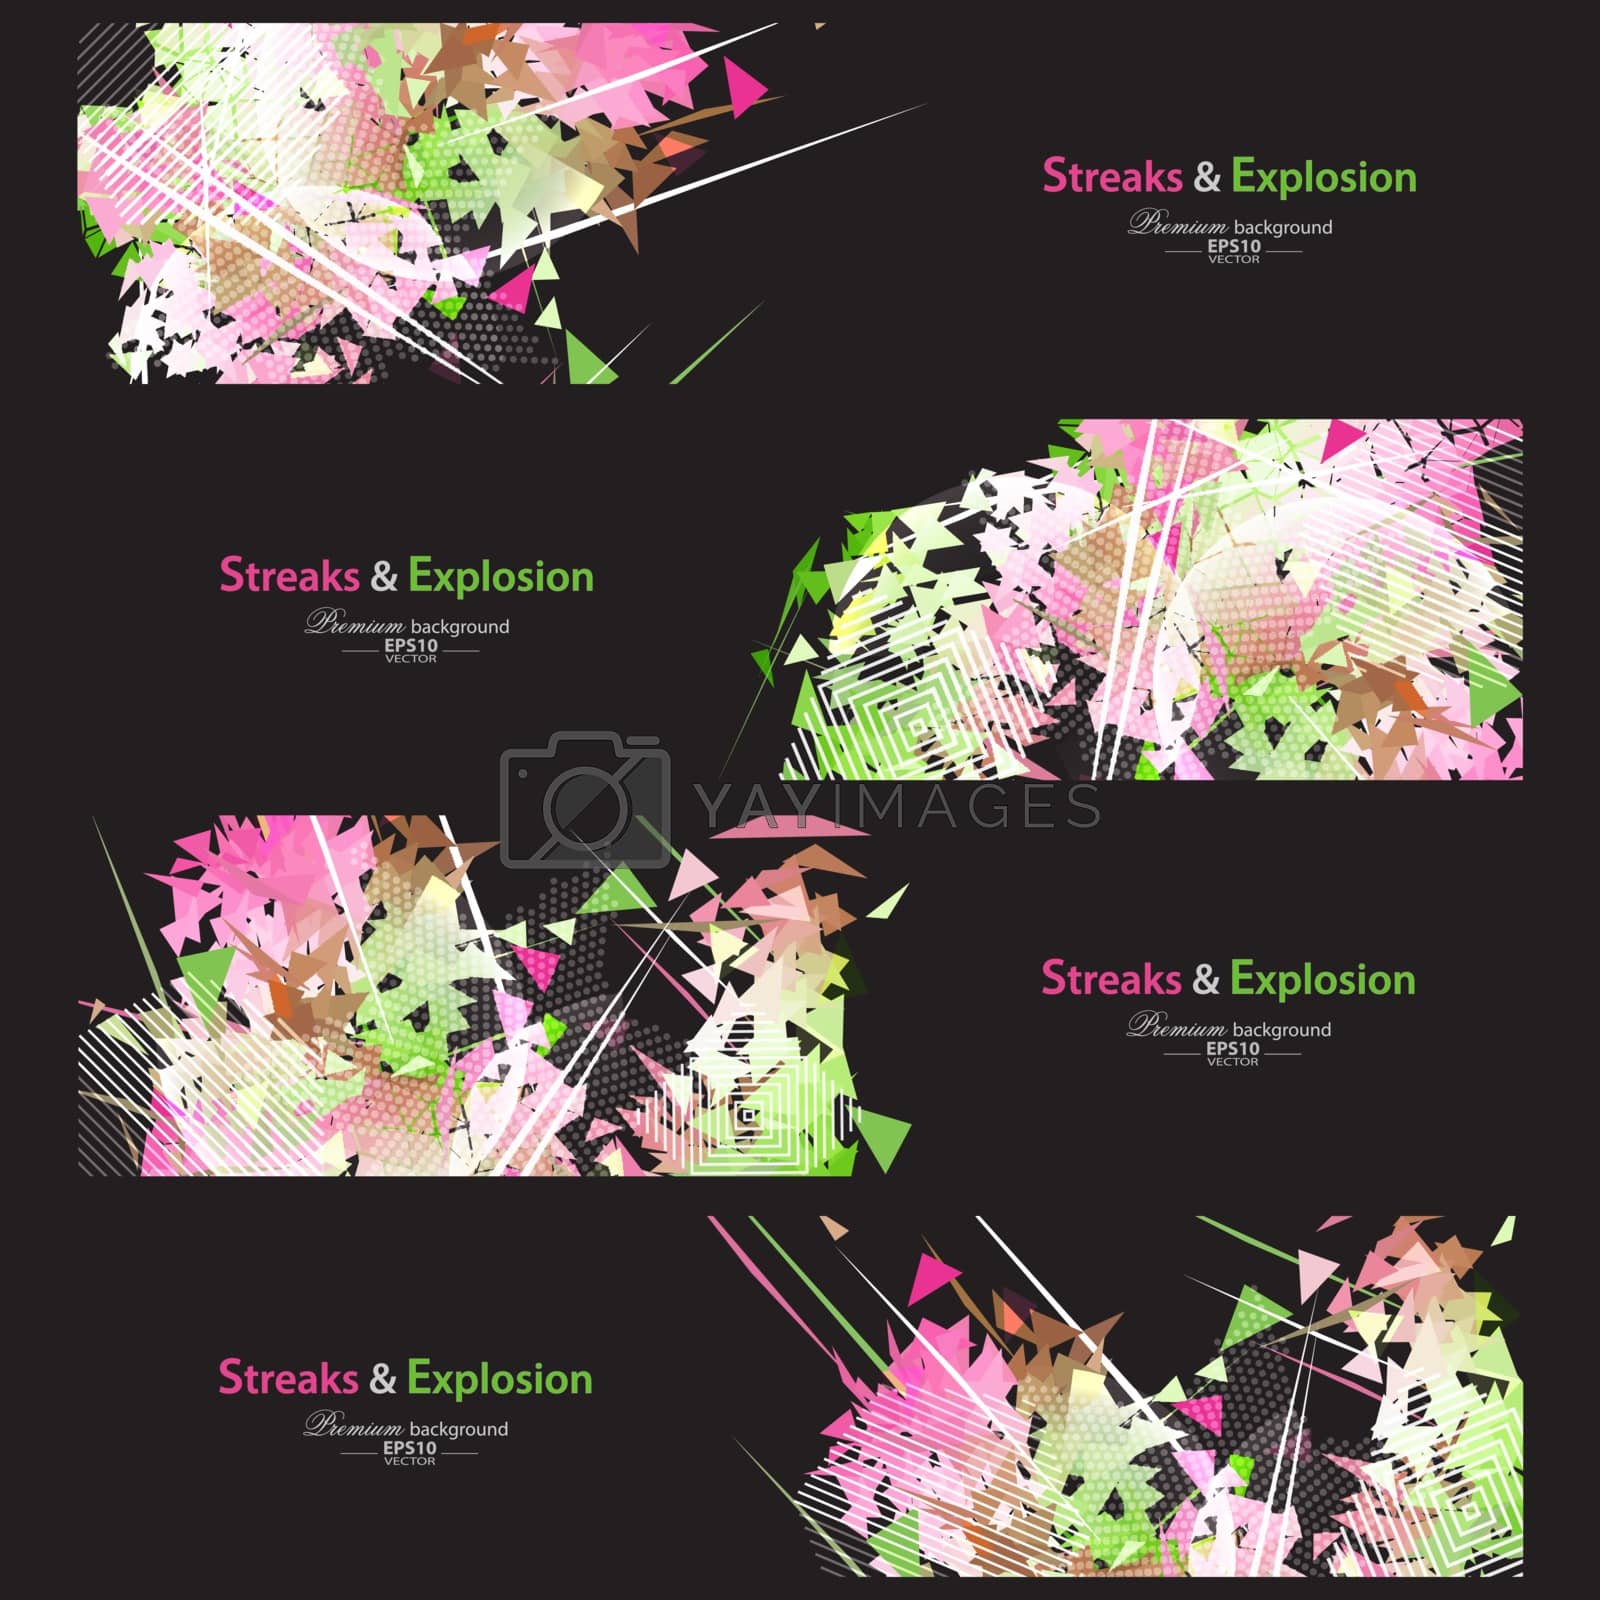 Royalty free image of Streaks and explosion banner set by stocklady